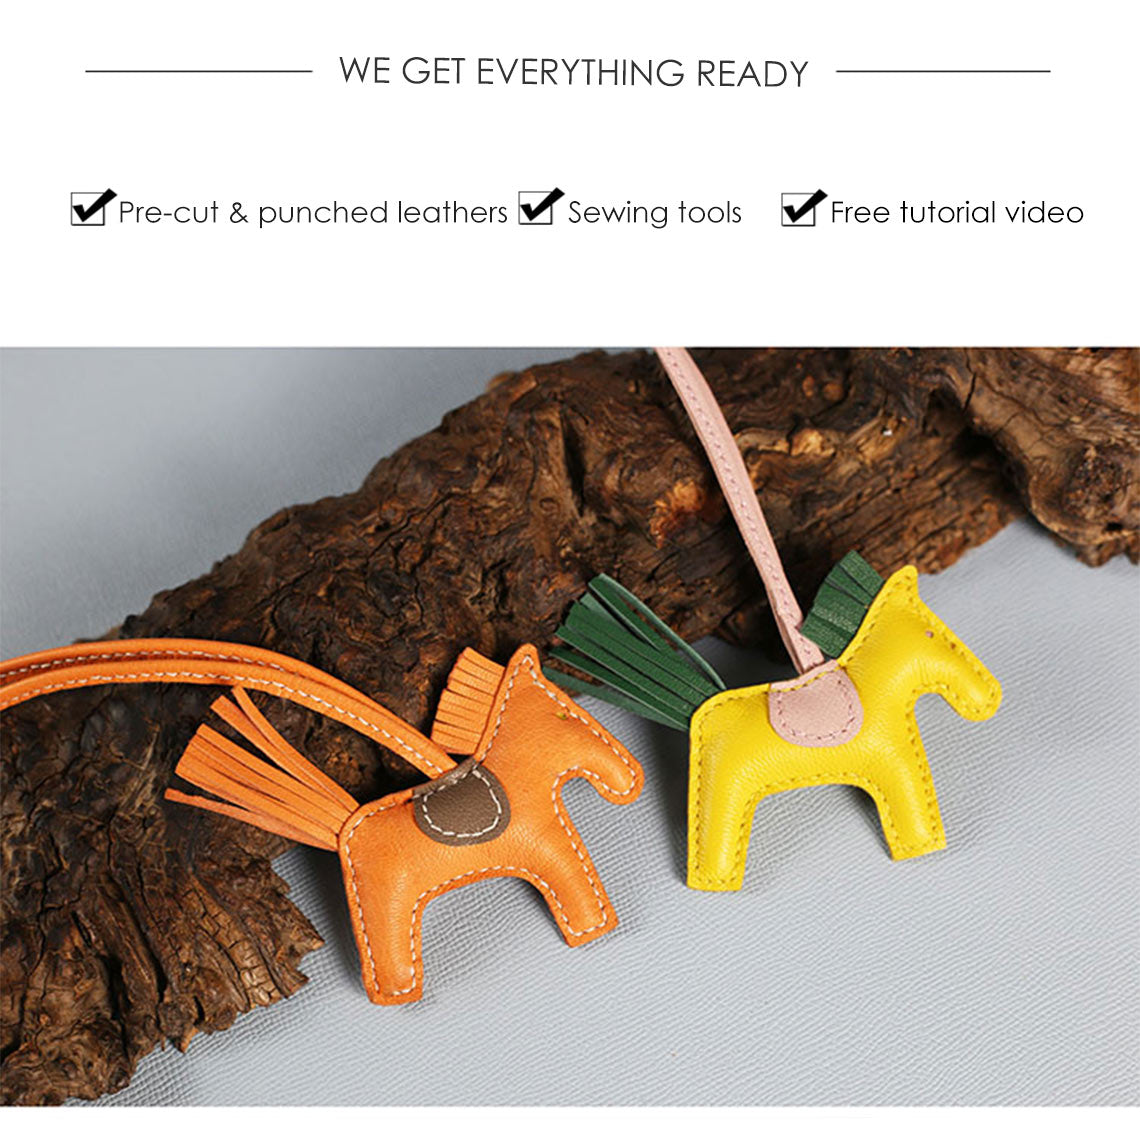 Handmade Leather Bag Charm Kit | DIY Leather Craft Rodeo Horse Bag Charm in Orange & Yellow - POPSEWING™